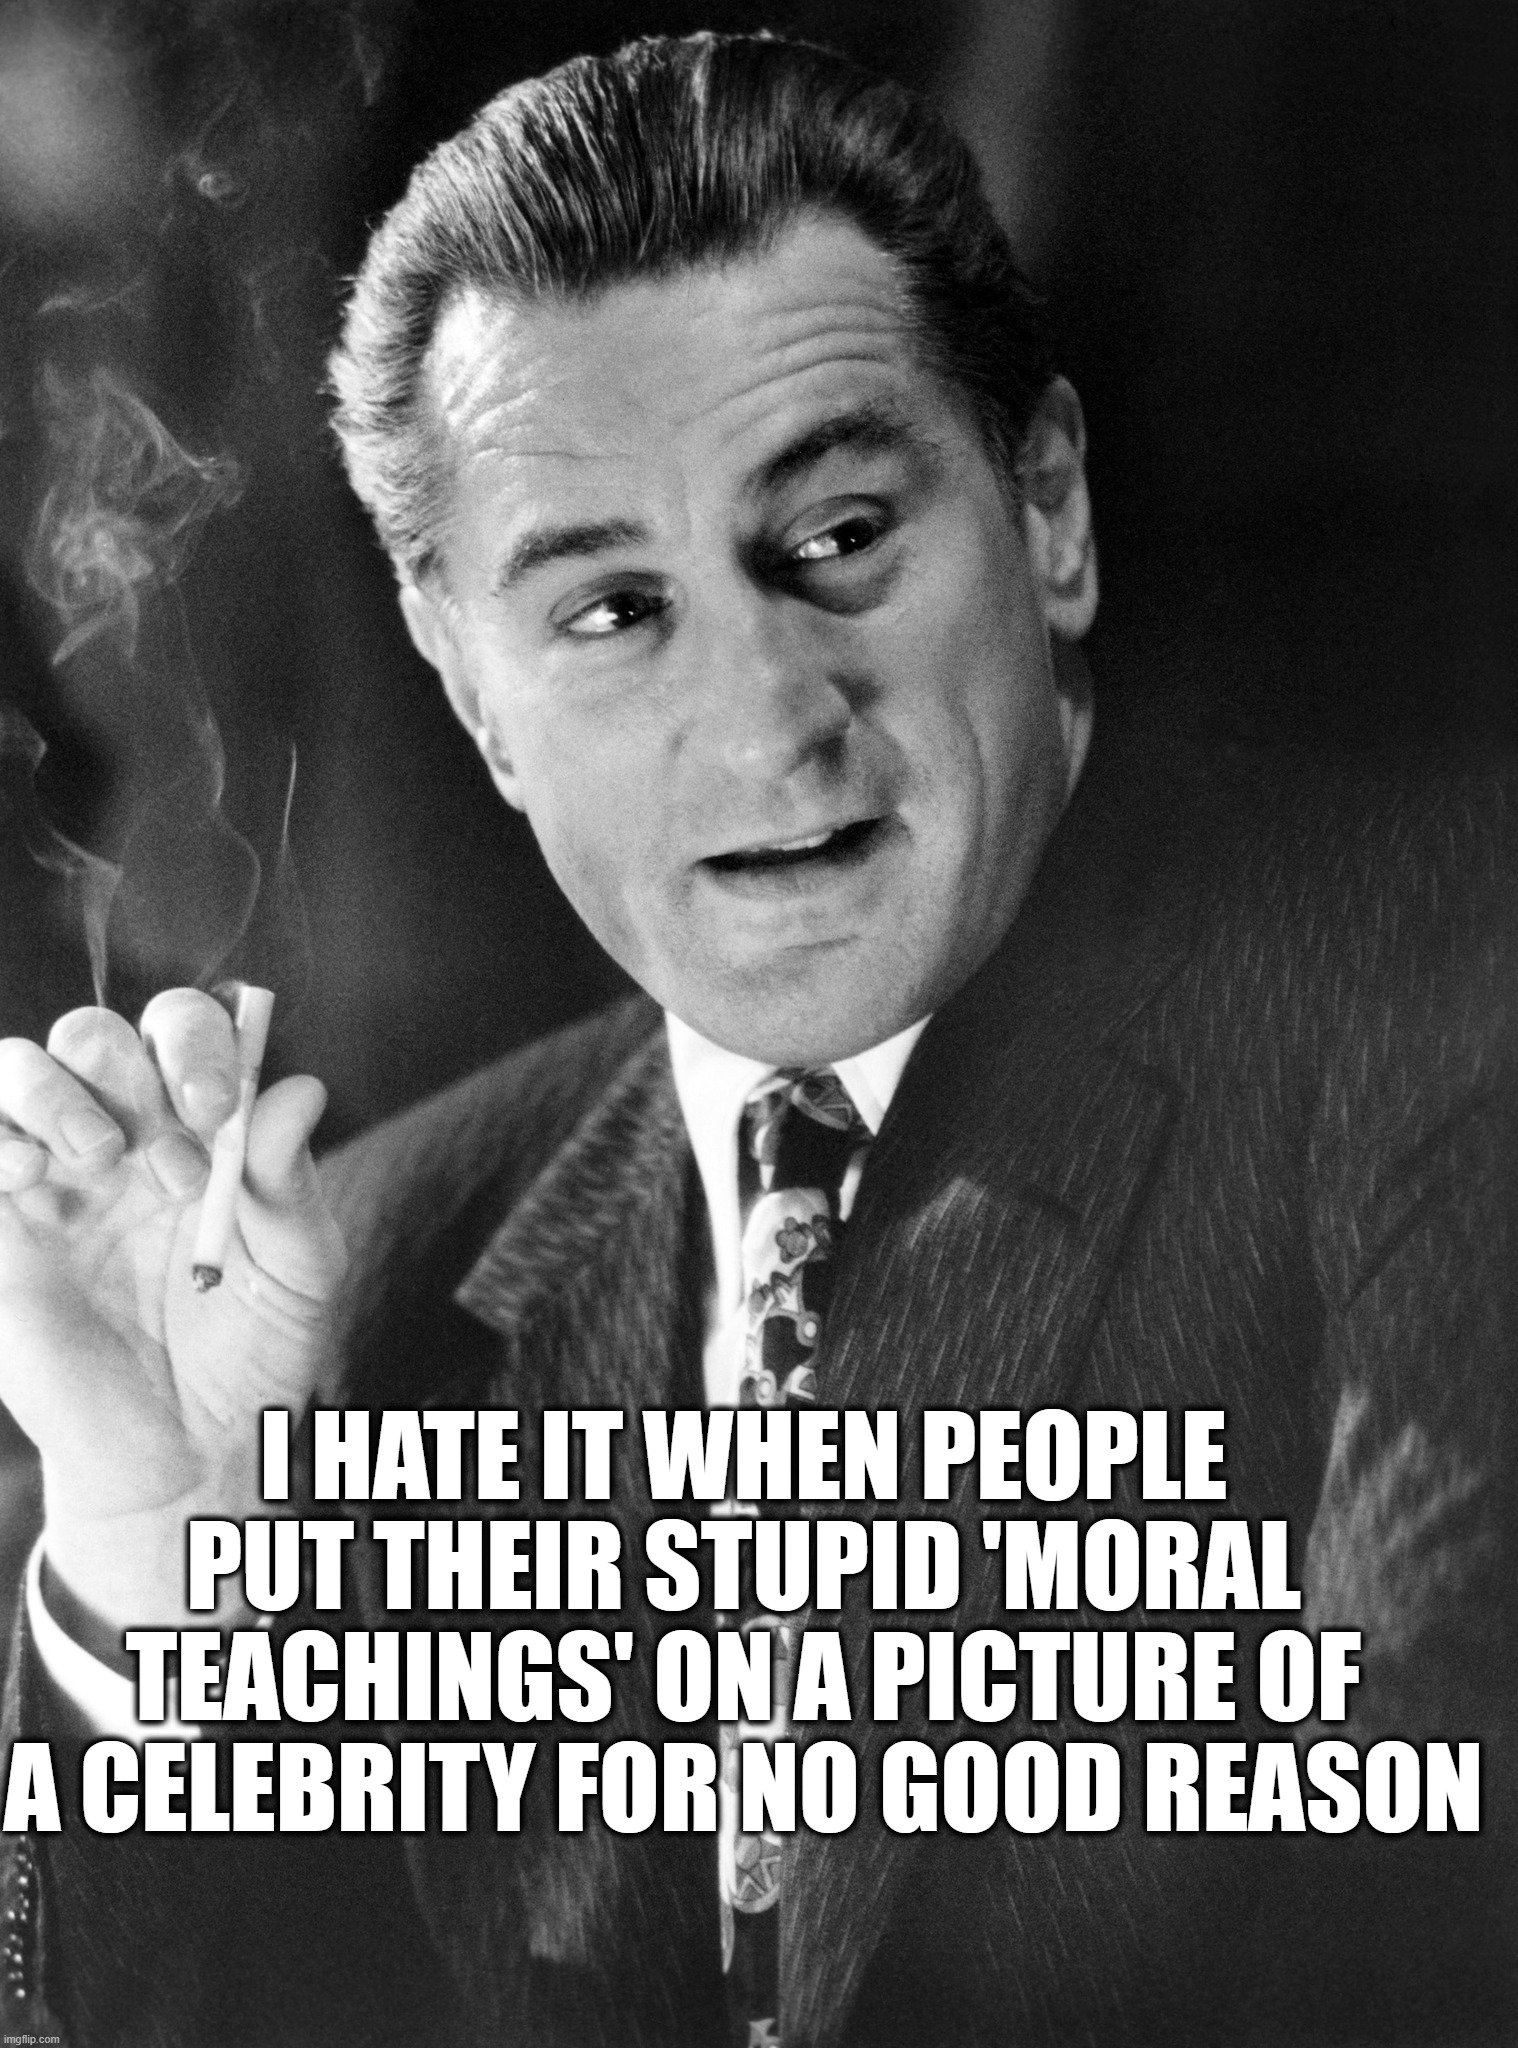 No Good Reason | I HATE IT WHEN PEOPLE PUT THEIR STUPID 'MORAL TEACHINGS' ON A PICTURE OF A CELEBRITY FOR NO GOOD REASON | image tagged in dumb,celebrity,images | made w/ Imgflip meme maker